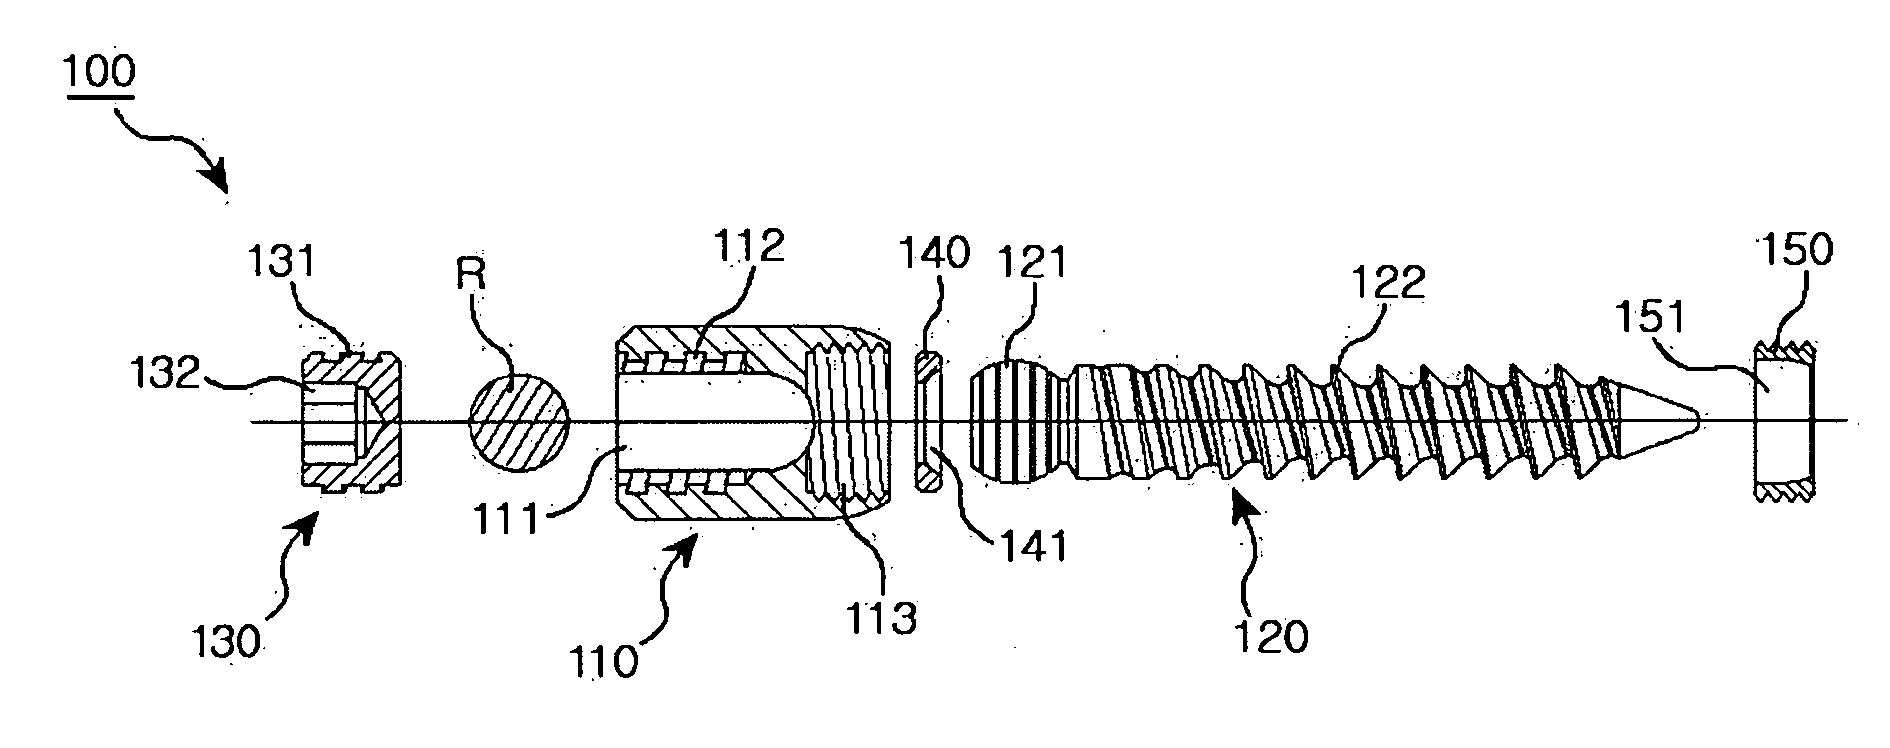 Spinal pedicle screw assembly